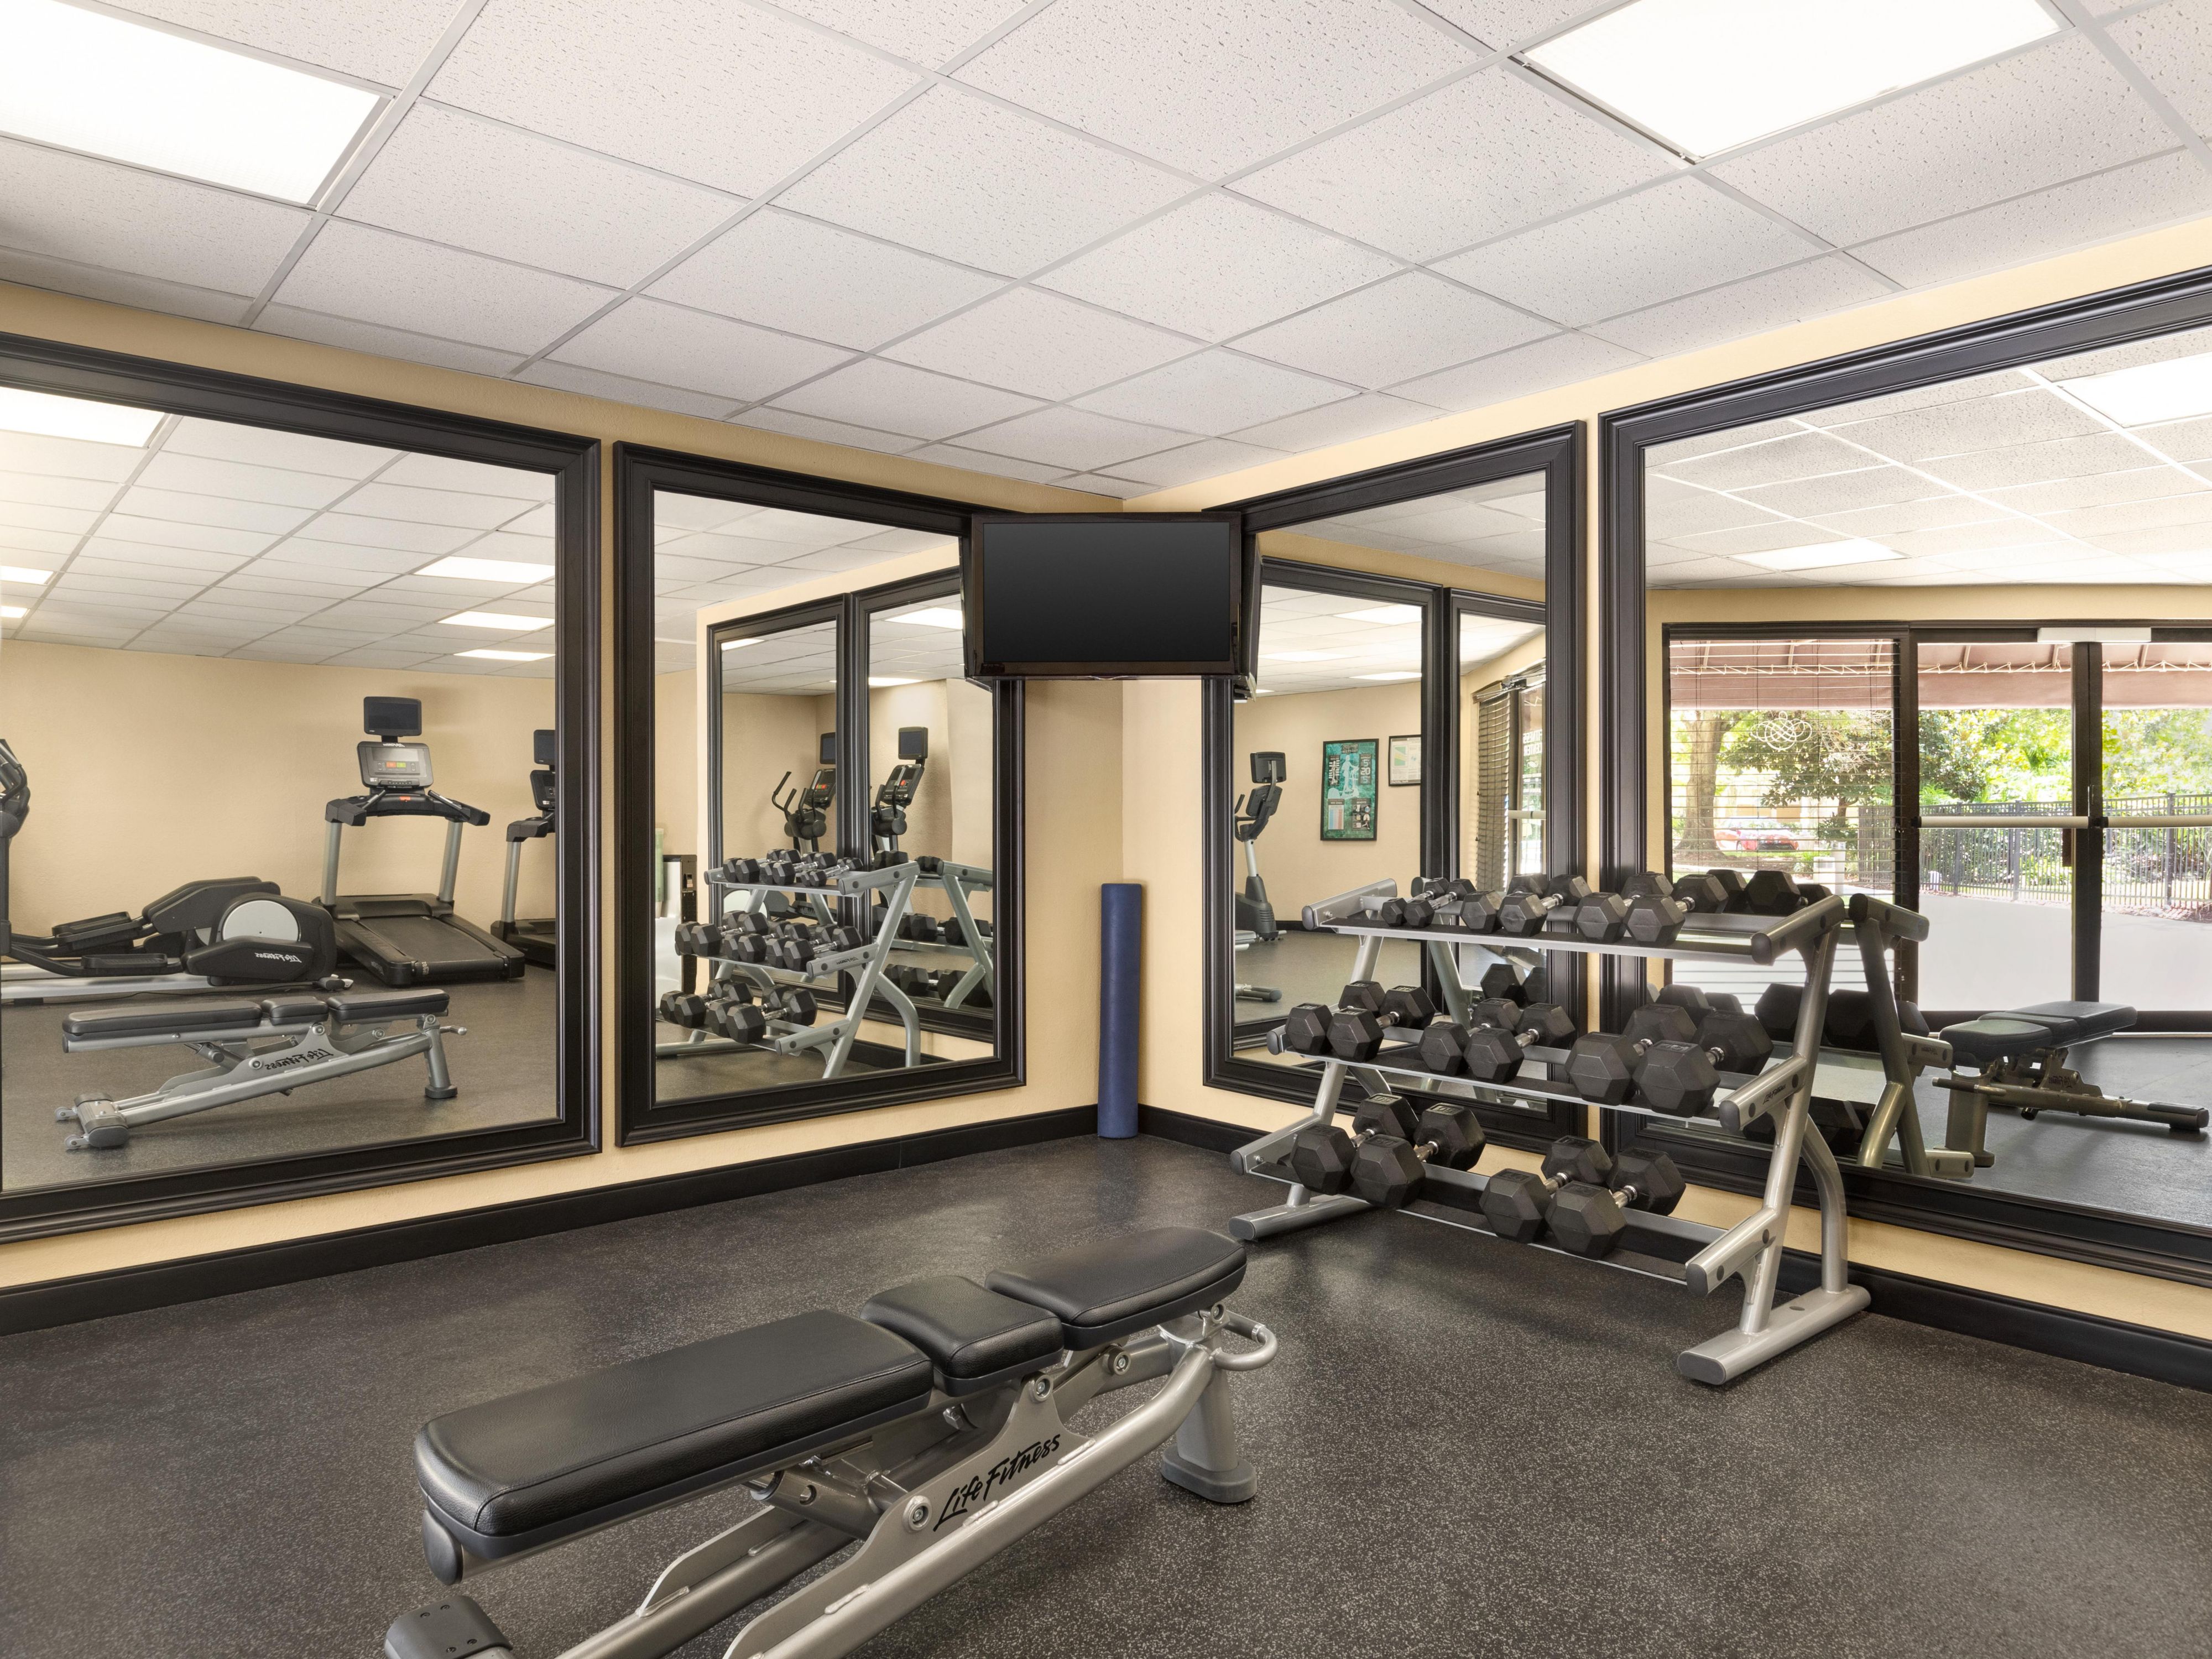 Don't settle for a basic fitness center when you can enjoy the latest, as well as a full basketball and tennis court